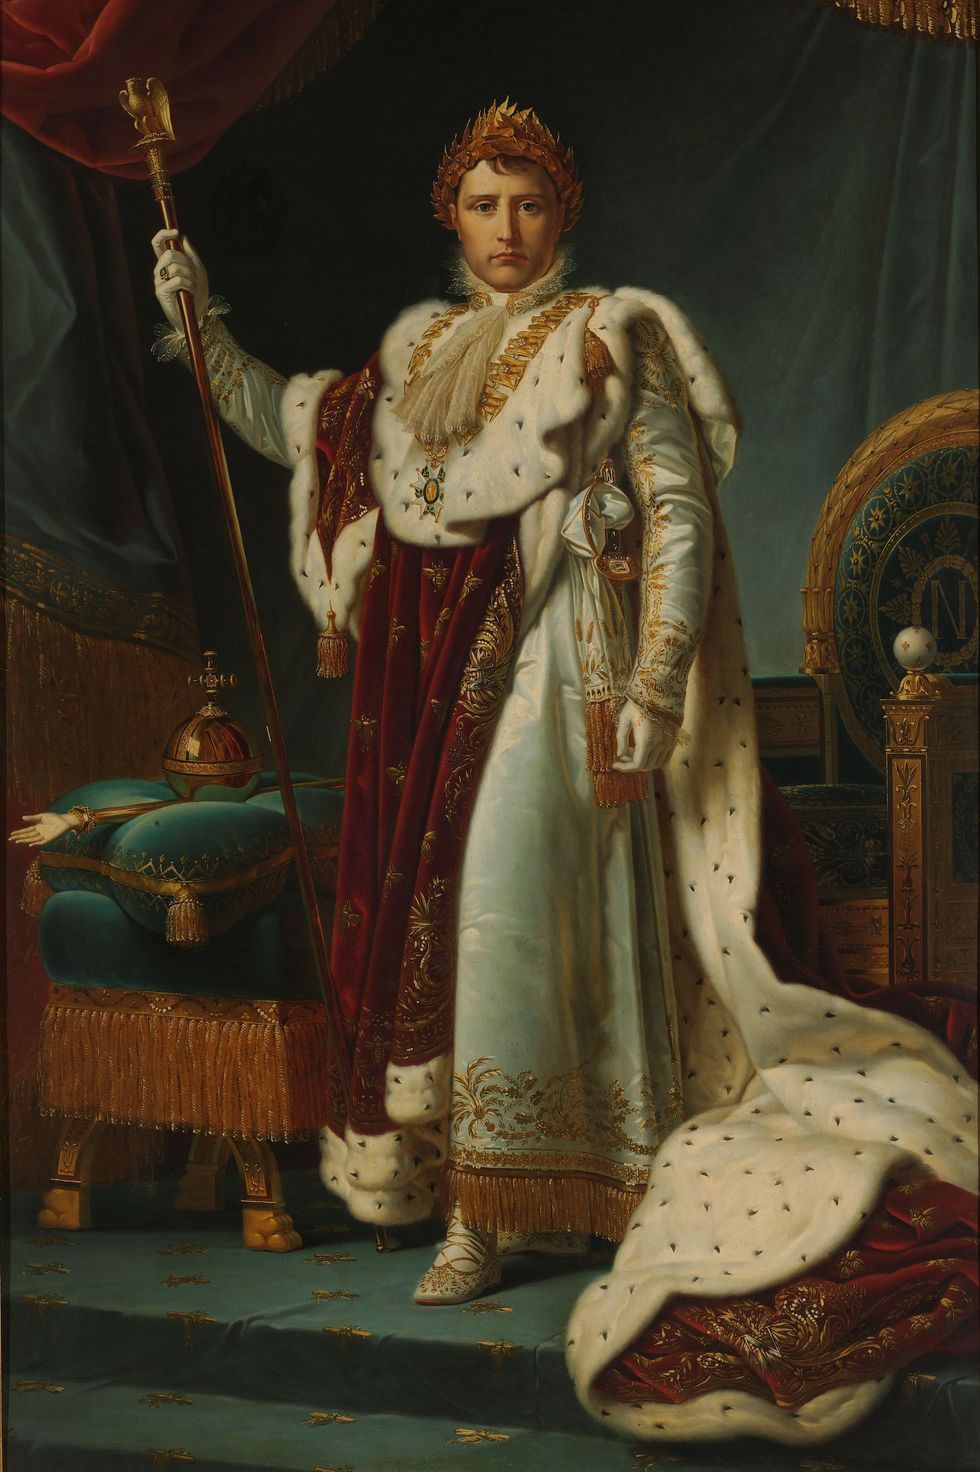 portrait of napoleon bonaparte as emperor napoleon i, he stands next to a throne while wearing a long red and white cape, a regal outfit, and a golden crown, he holds a long golden staff